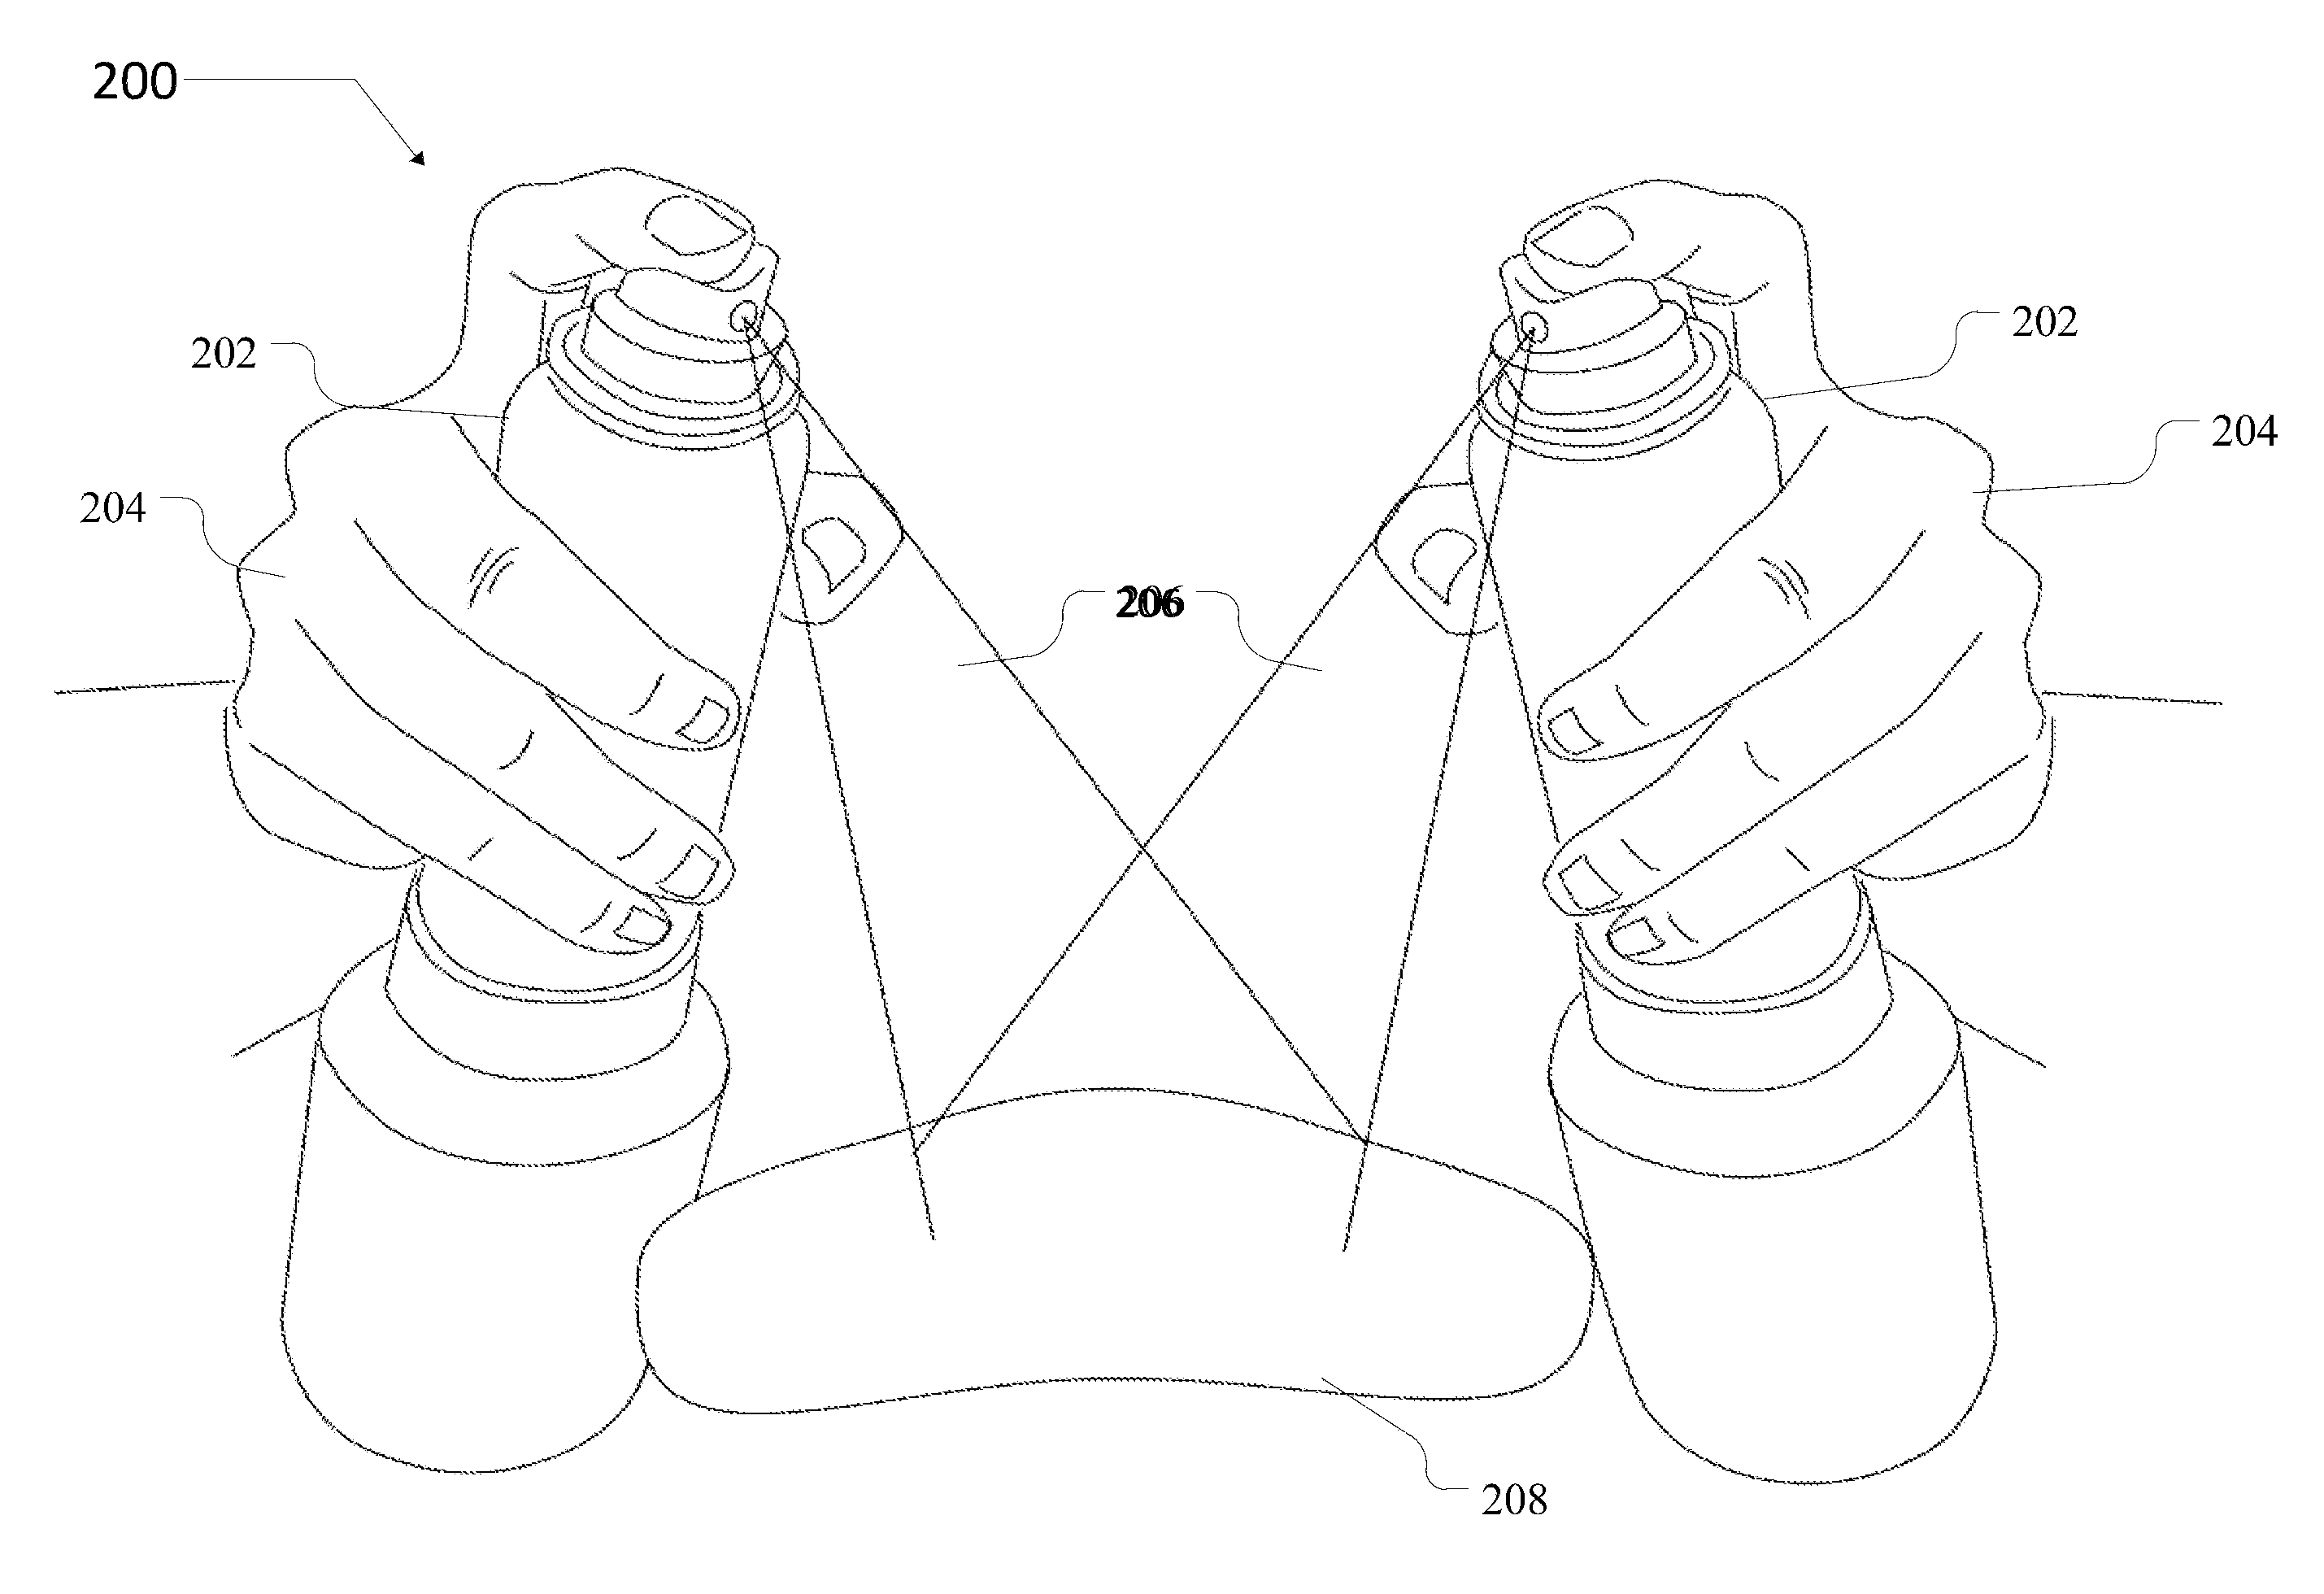 System and Method of Applying a Chrome-Like Coating on Objects